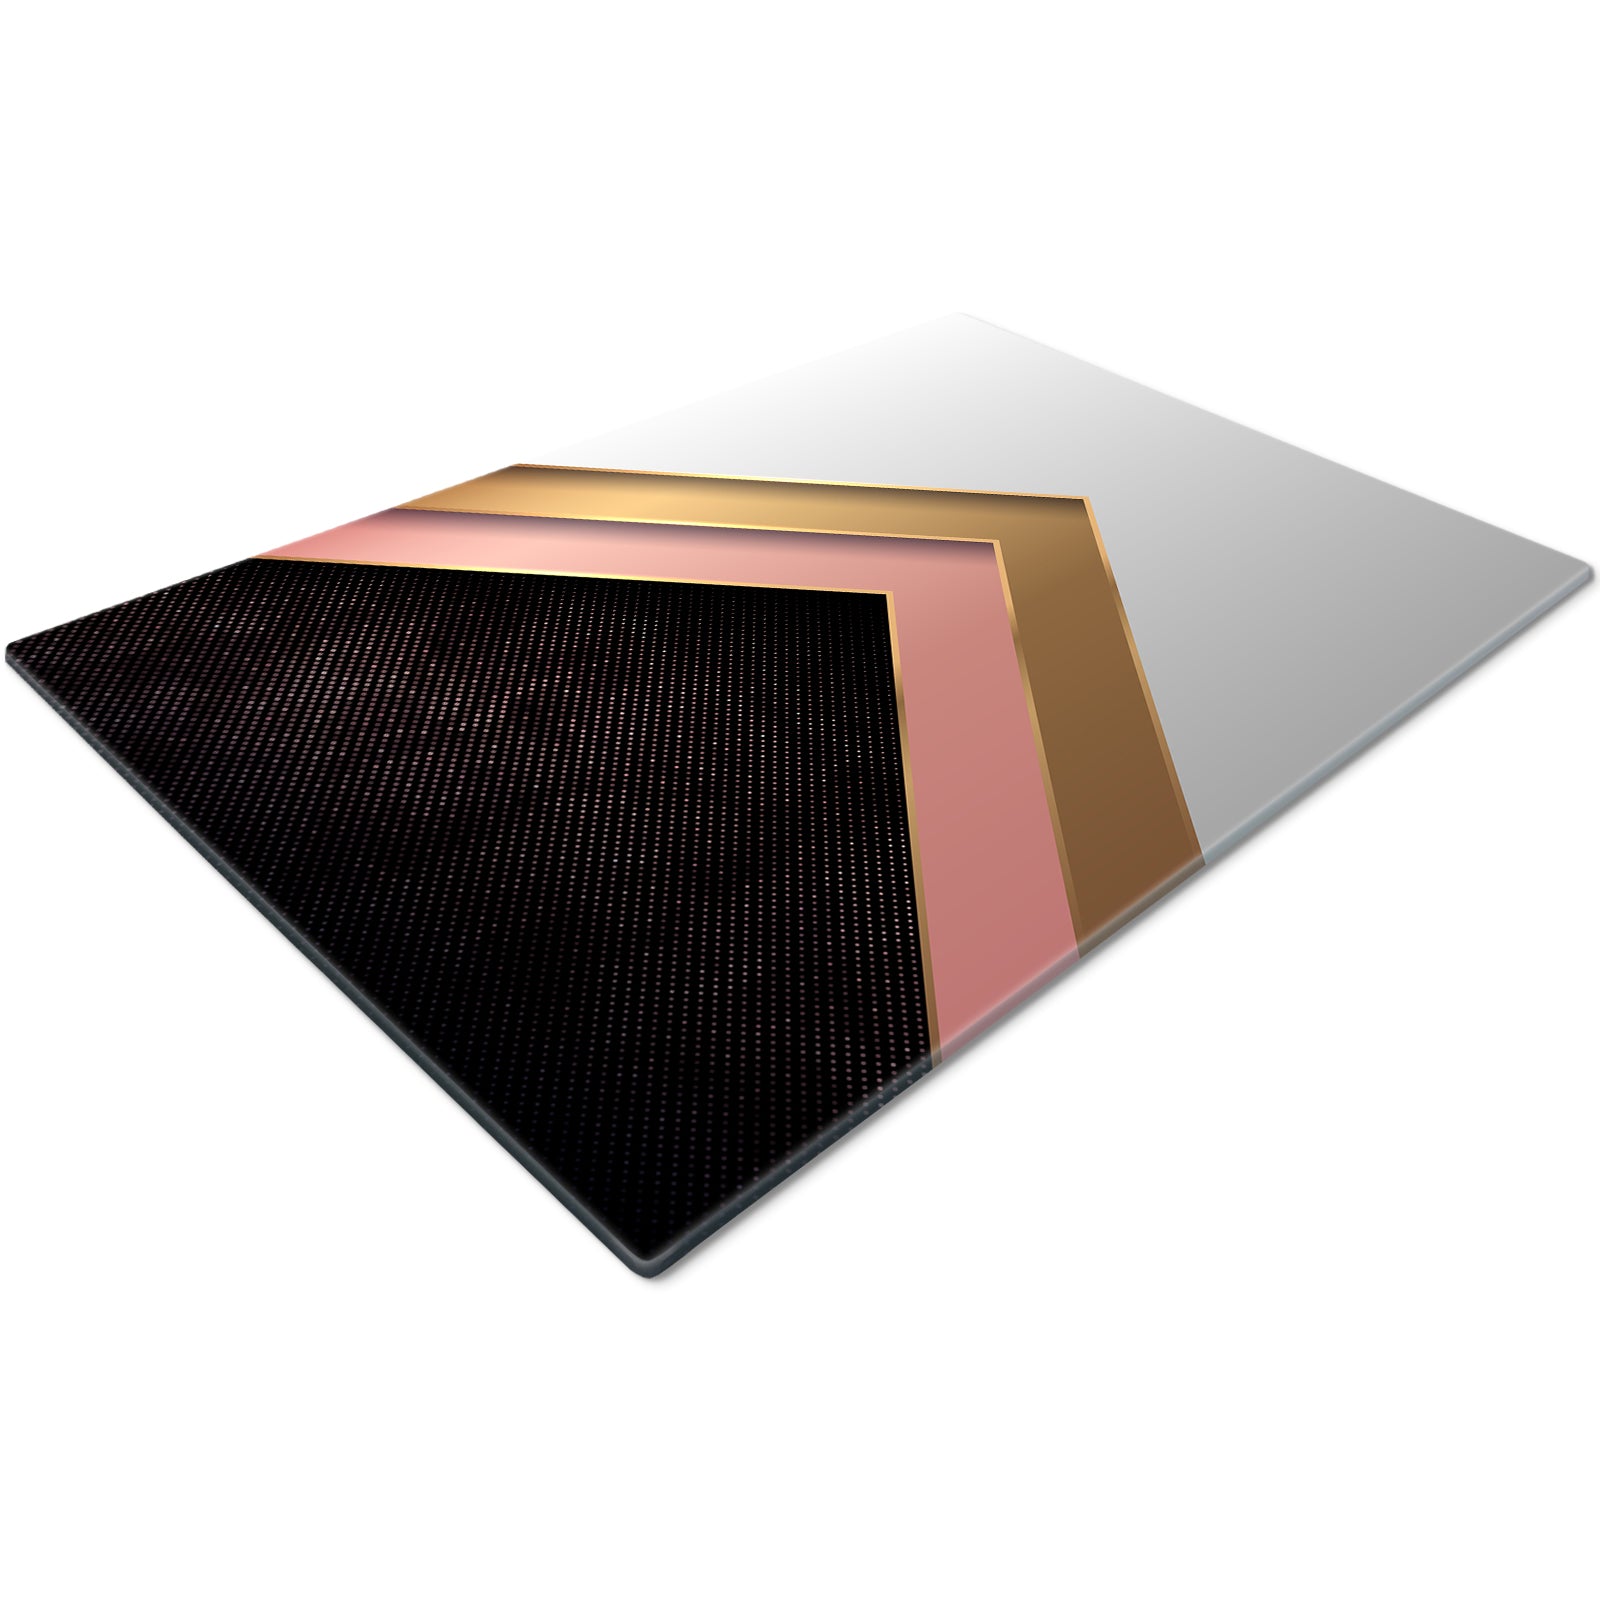 Glass Chopping Board For Kitchen in Gold Pink Black Design